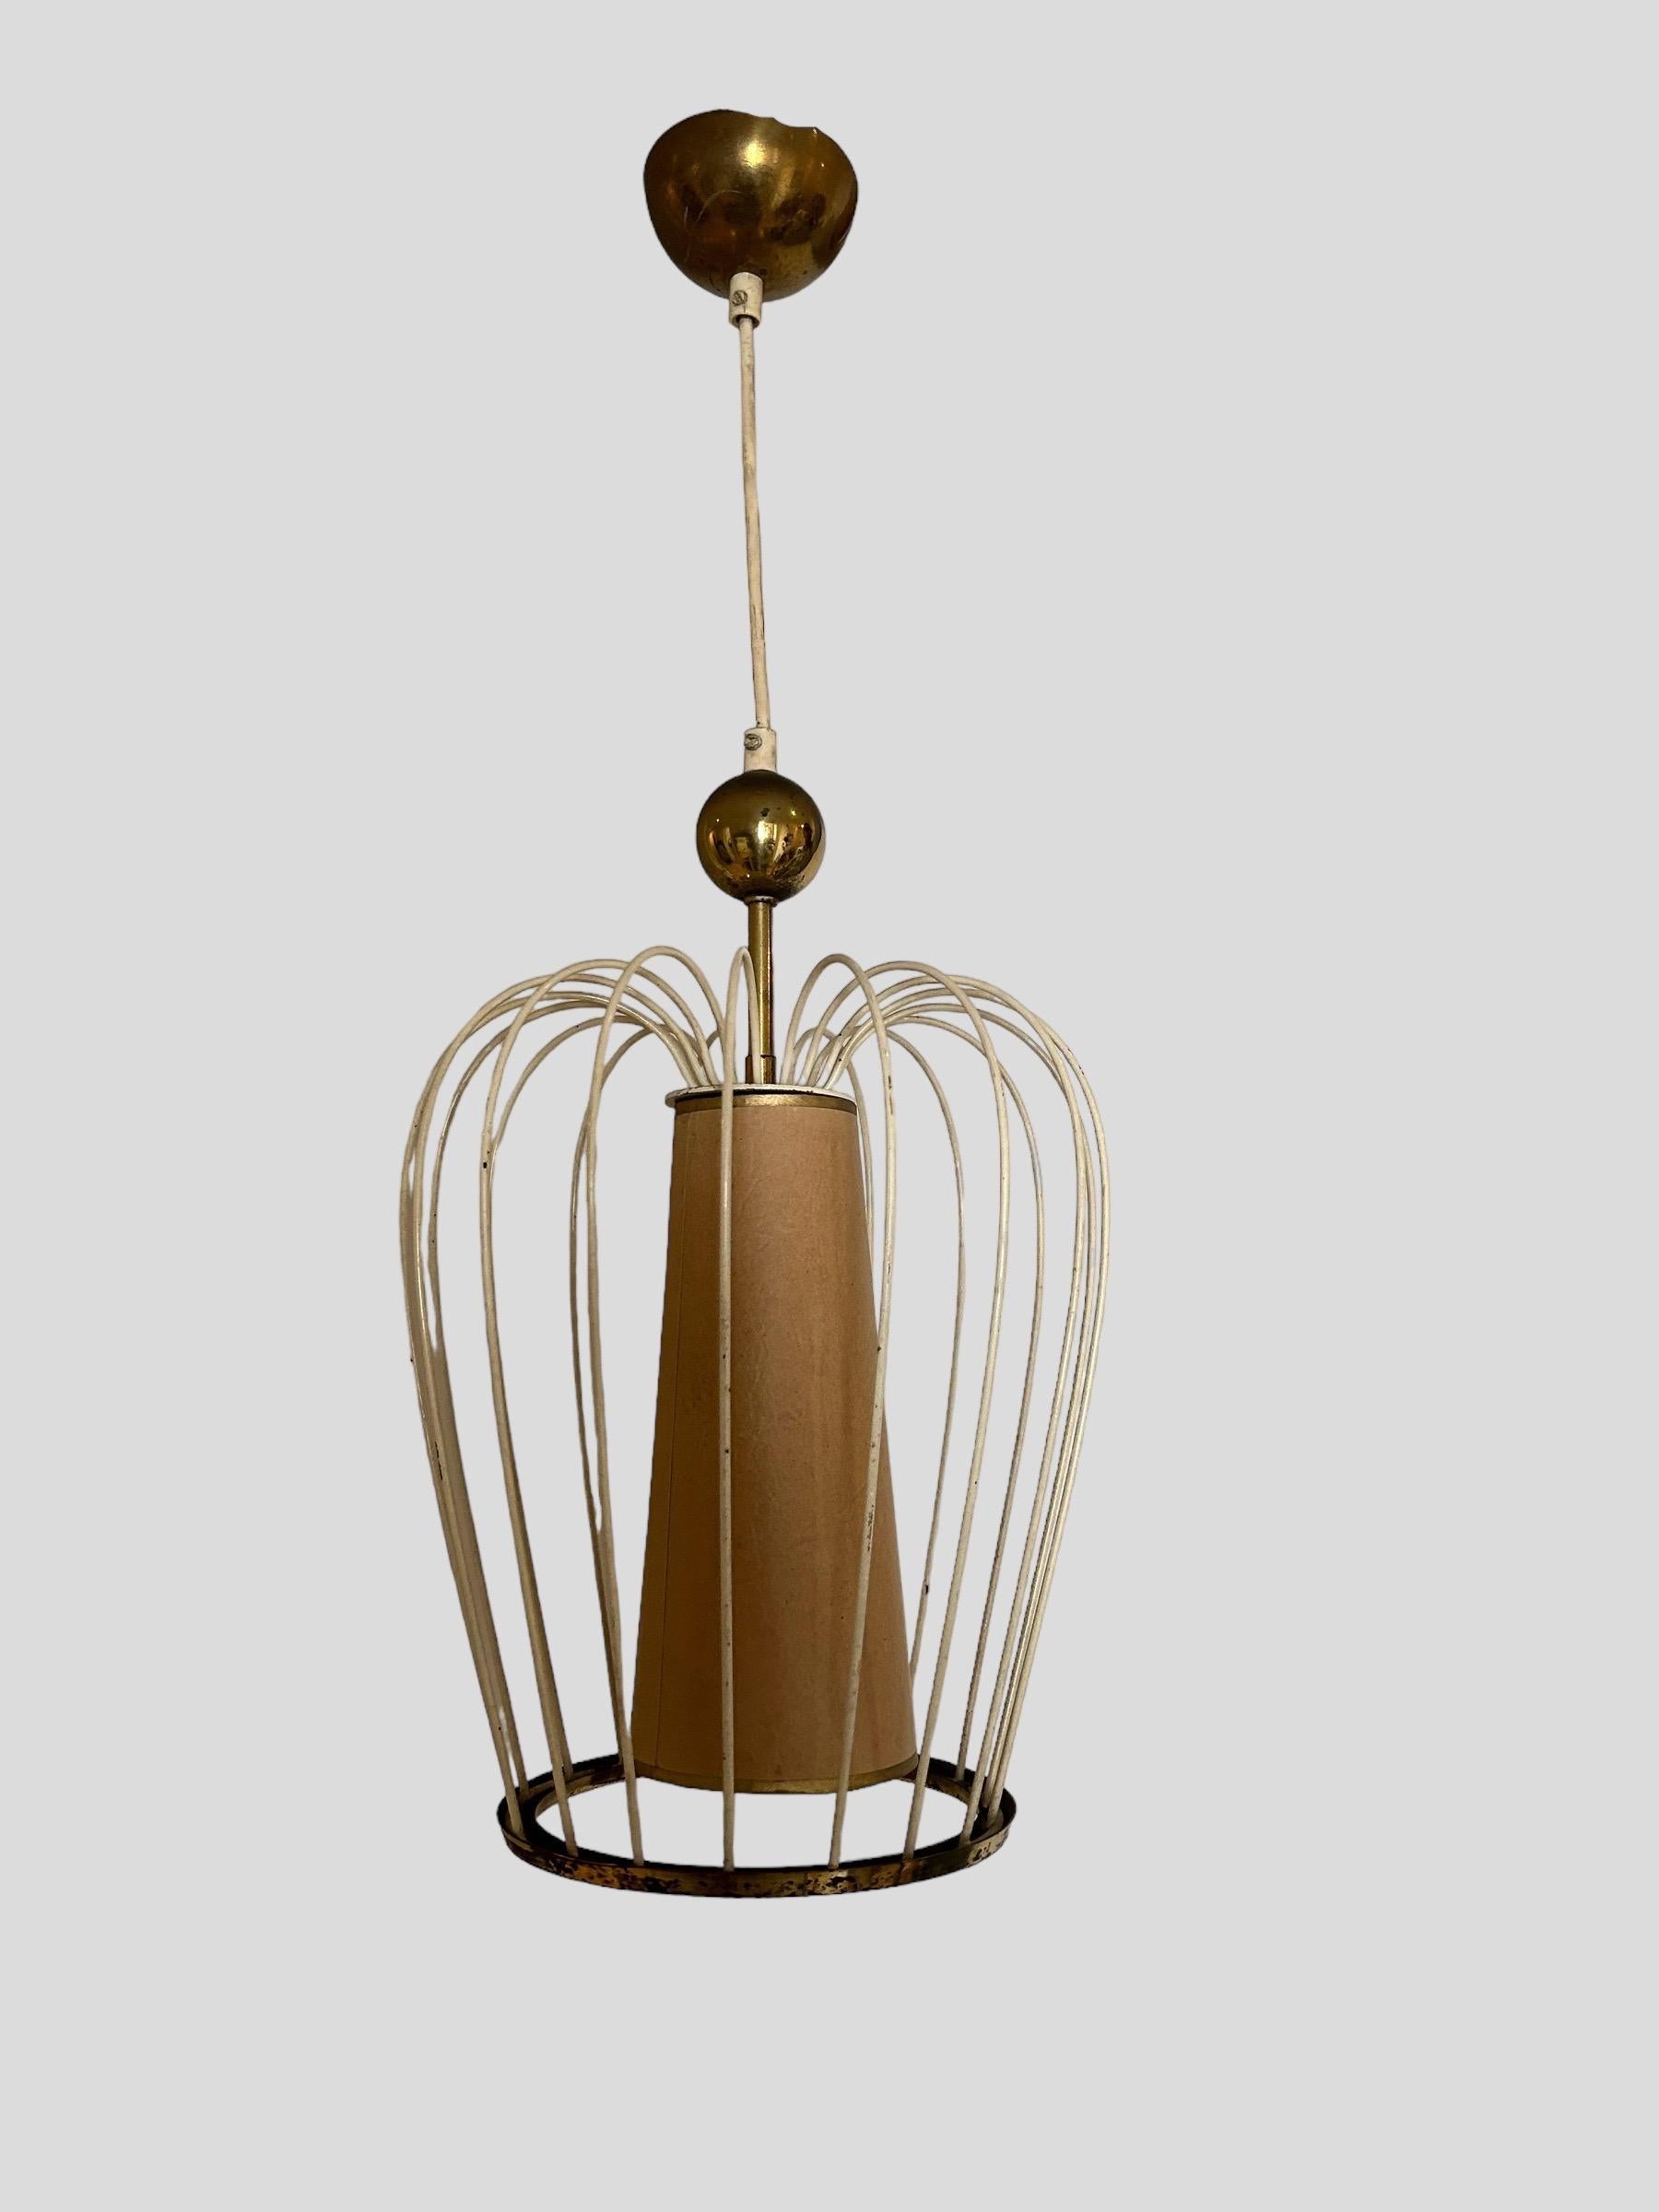 Beautiful ceiling light with metal cage and paper reflector, brass elements.
Original condition from the 1950's
Model close to the work of Jean Royére